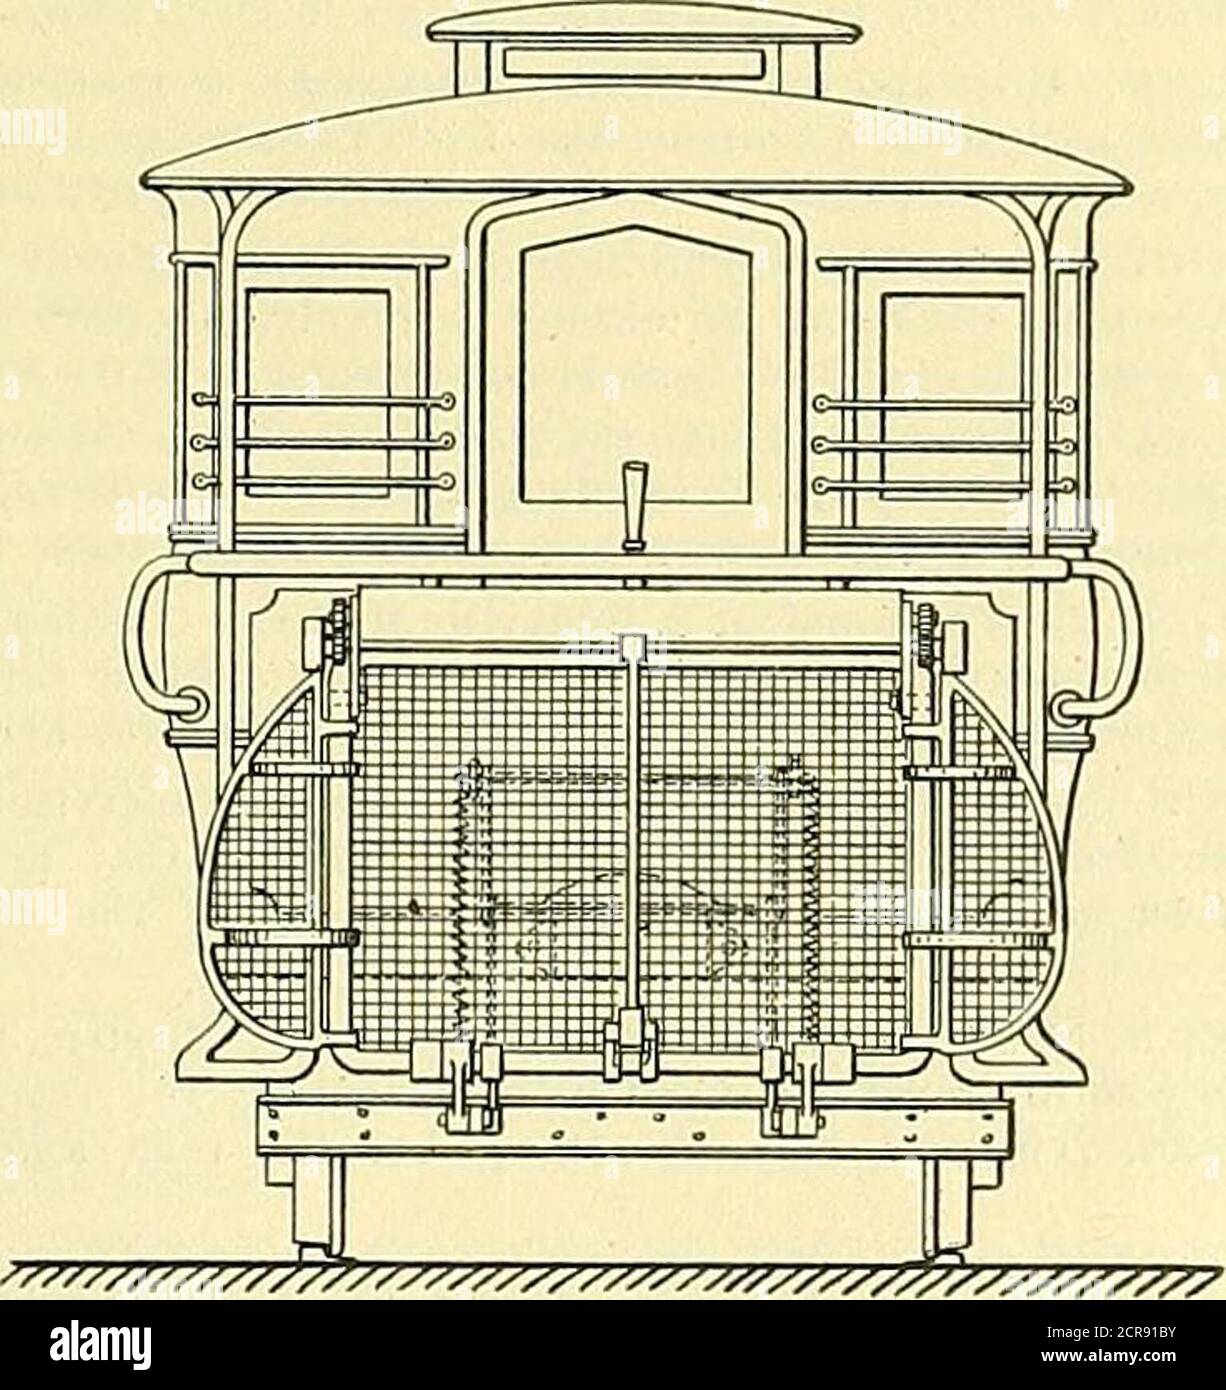 . Electric railway gazette . d,preventing injury from the dashboard or drawbar, ismade of the same material as the fender, small rollersbeing used to prevent the chafing of the dashboard. In its normal position the fender rides at a sufficientdistance from the rails so that it does not touch themwhen the car rocks. The adjustment for this distanceis made by the jointed rods or arms. When necessary,as in the case of a person prostrate on the track,the roller can be firmly pressed down upon the railsby a slight movement of the lever. The roller isthen caused to revolve toward the car, so that it Stock Photo